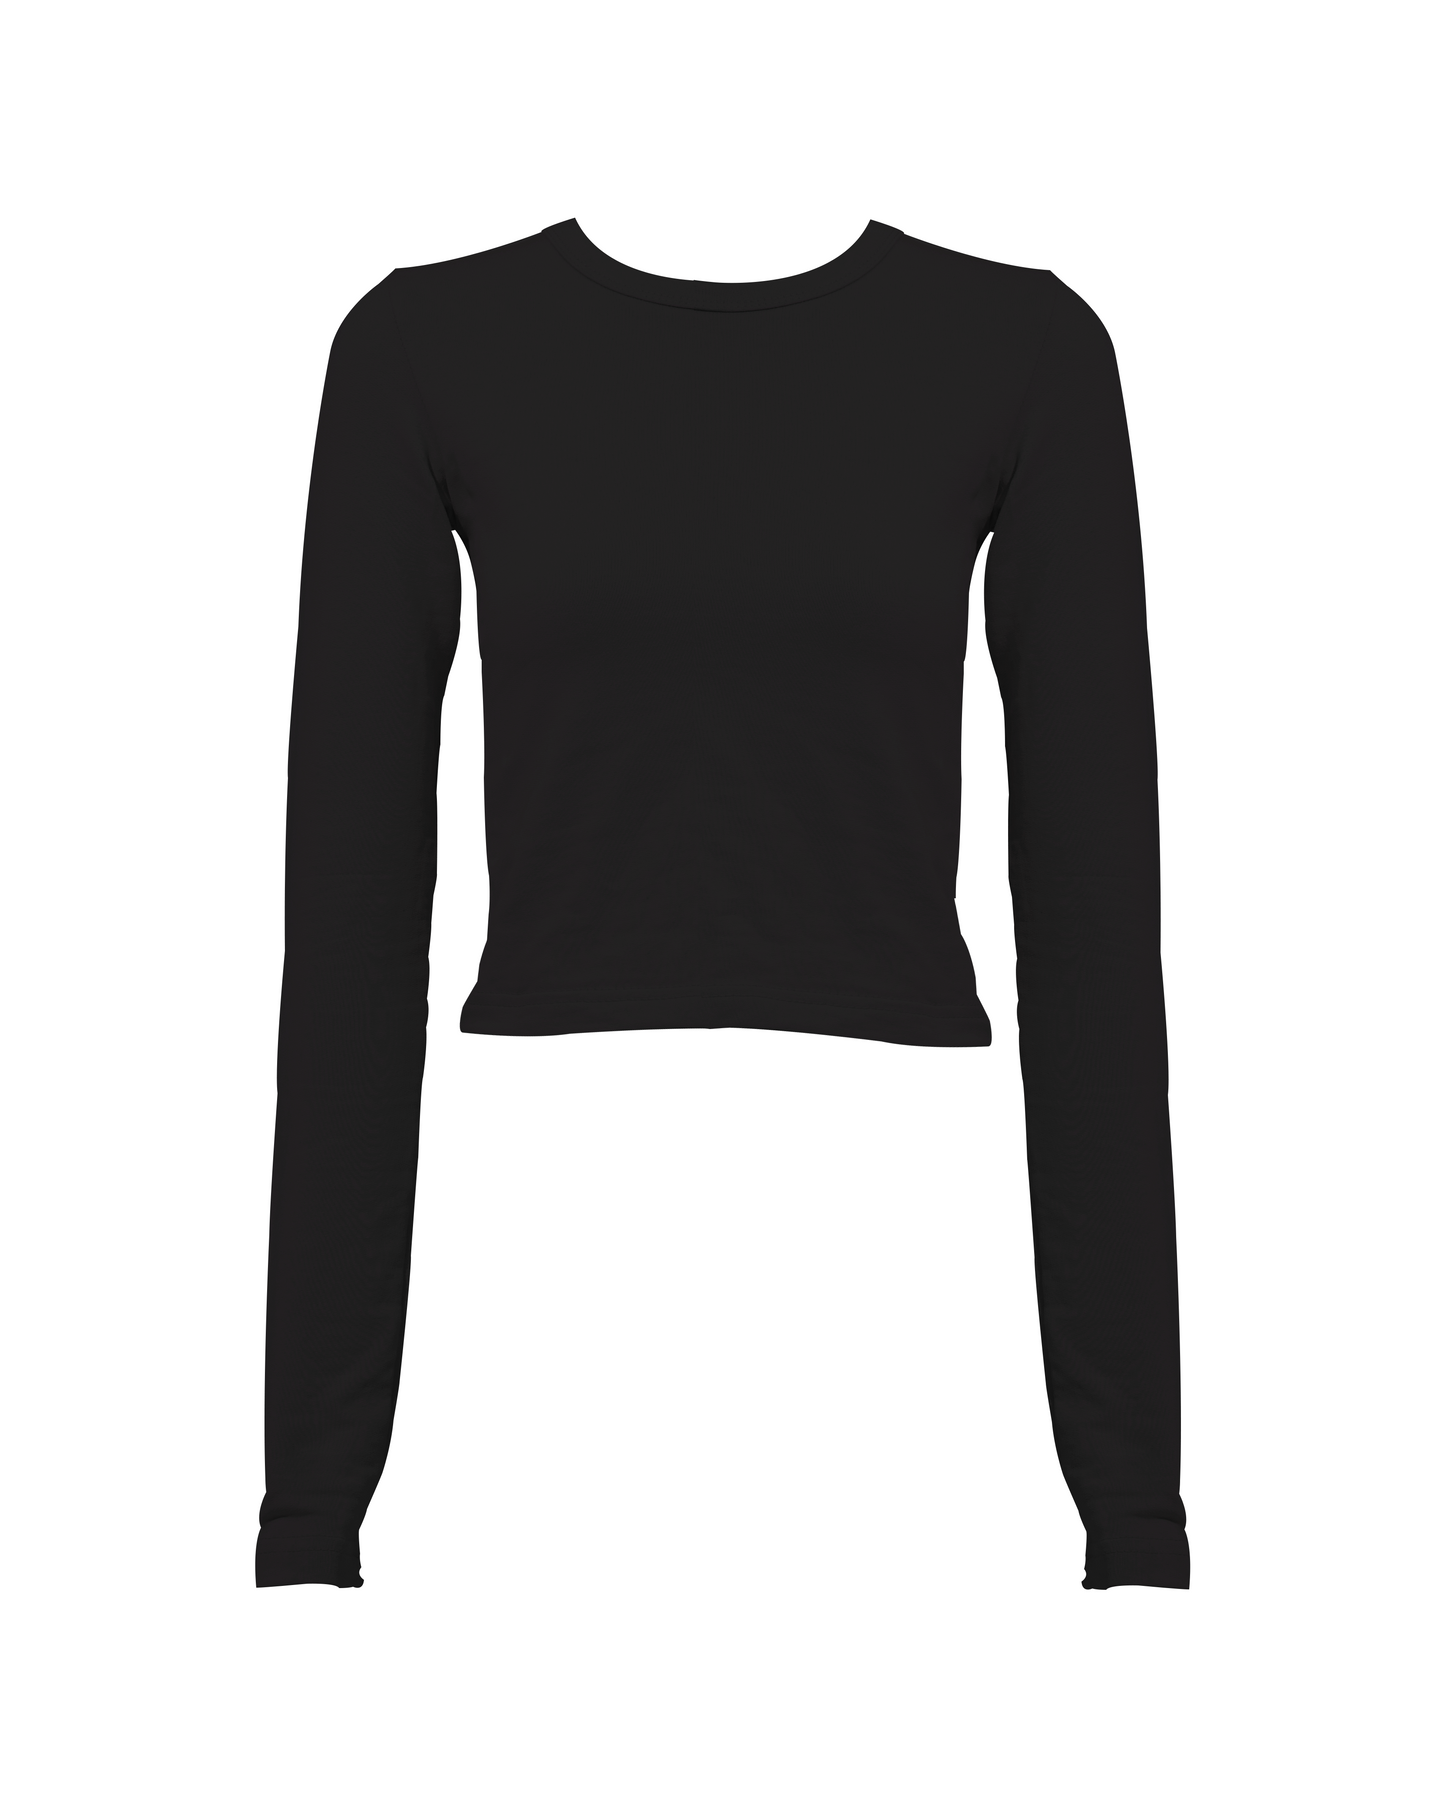 BLACK COTTON - LONG SLEEVES TOP